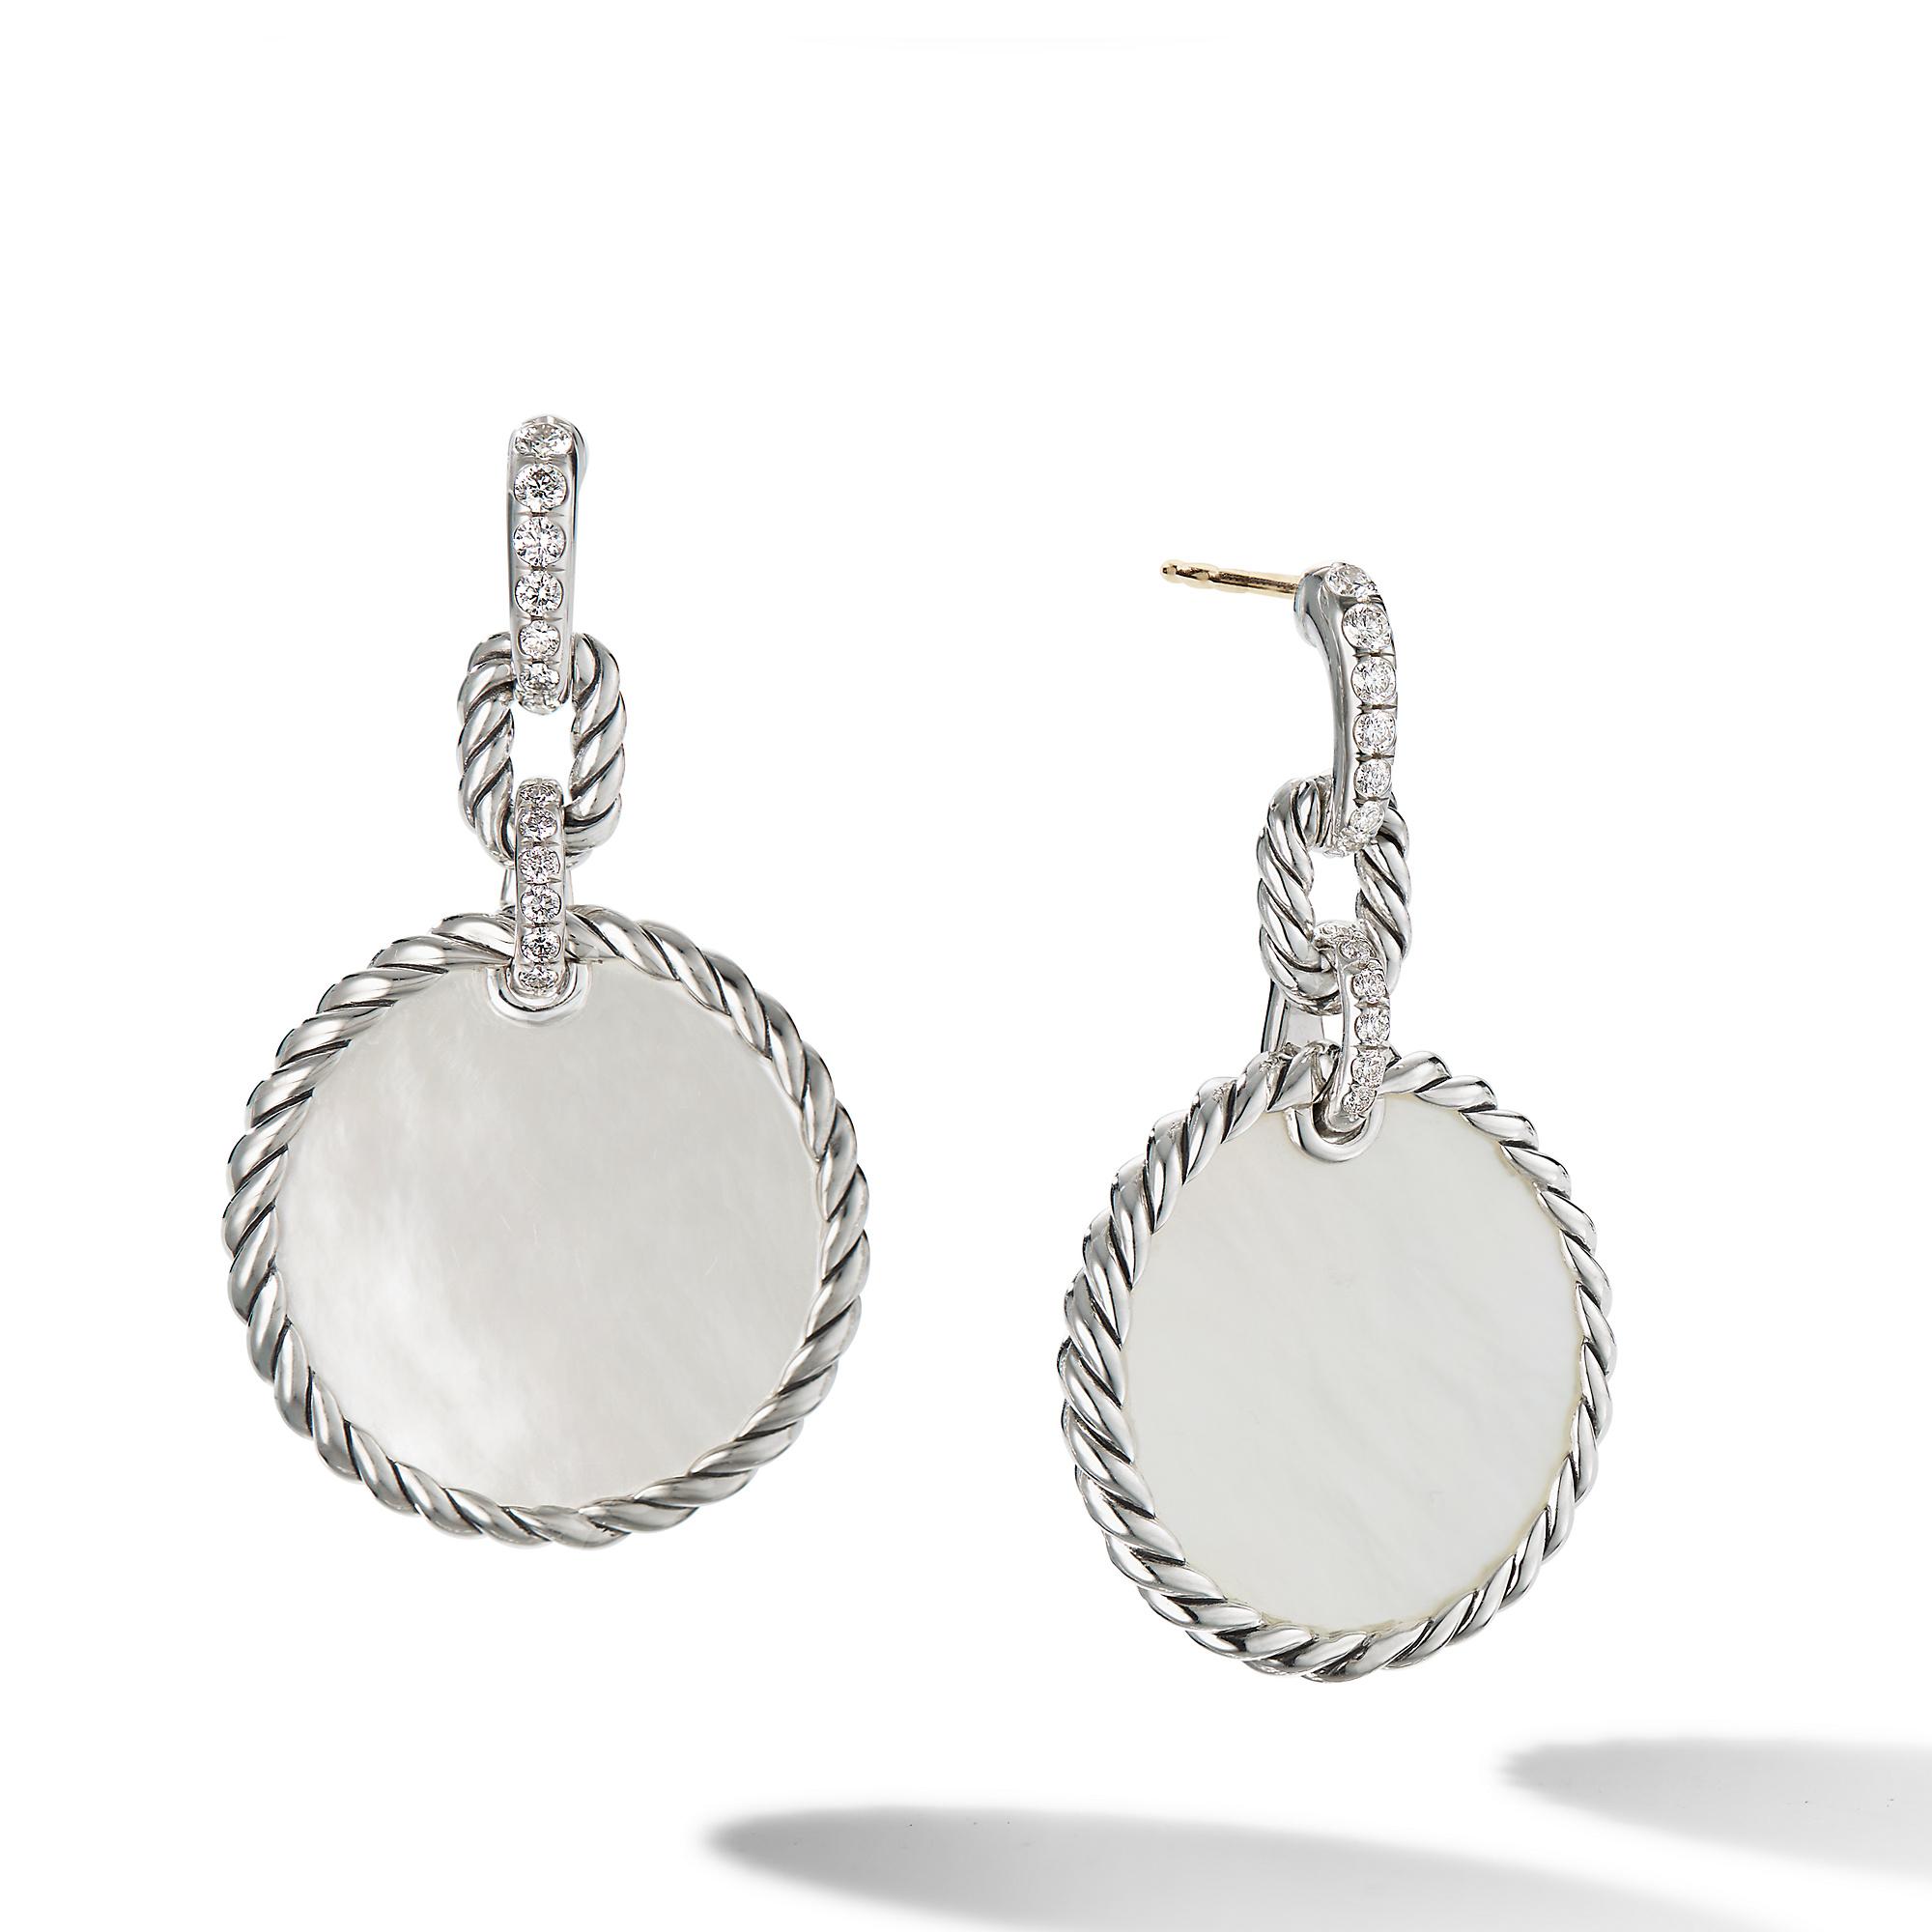 David Yurman DY Elements Drop Earrings with Mother Of Pearl and Pave Diamonds, 19mm